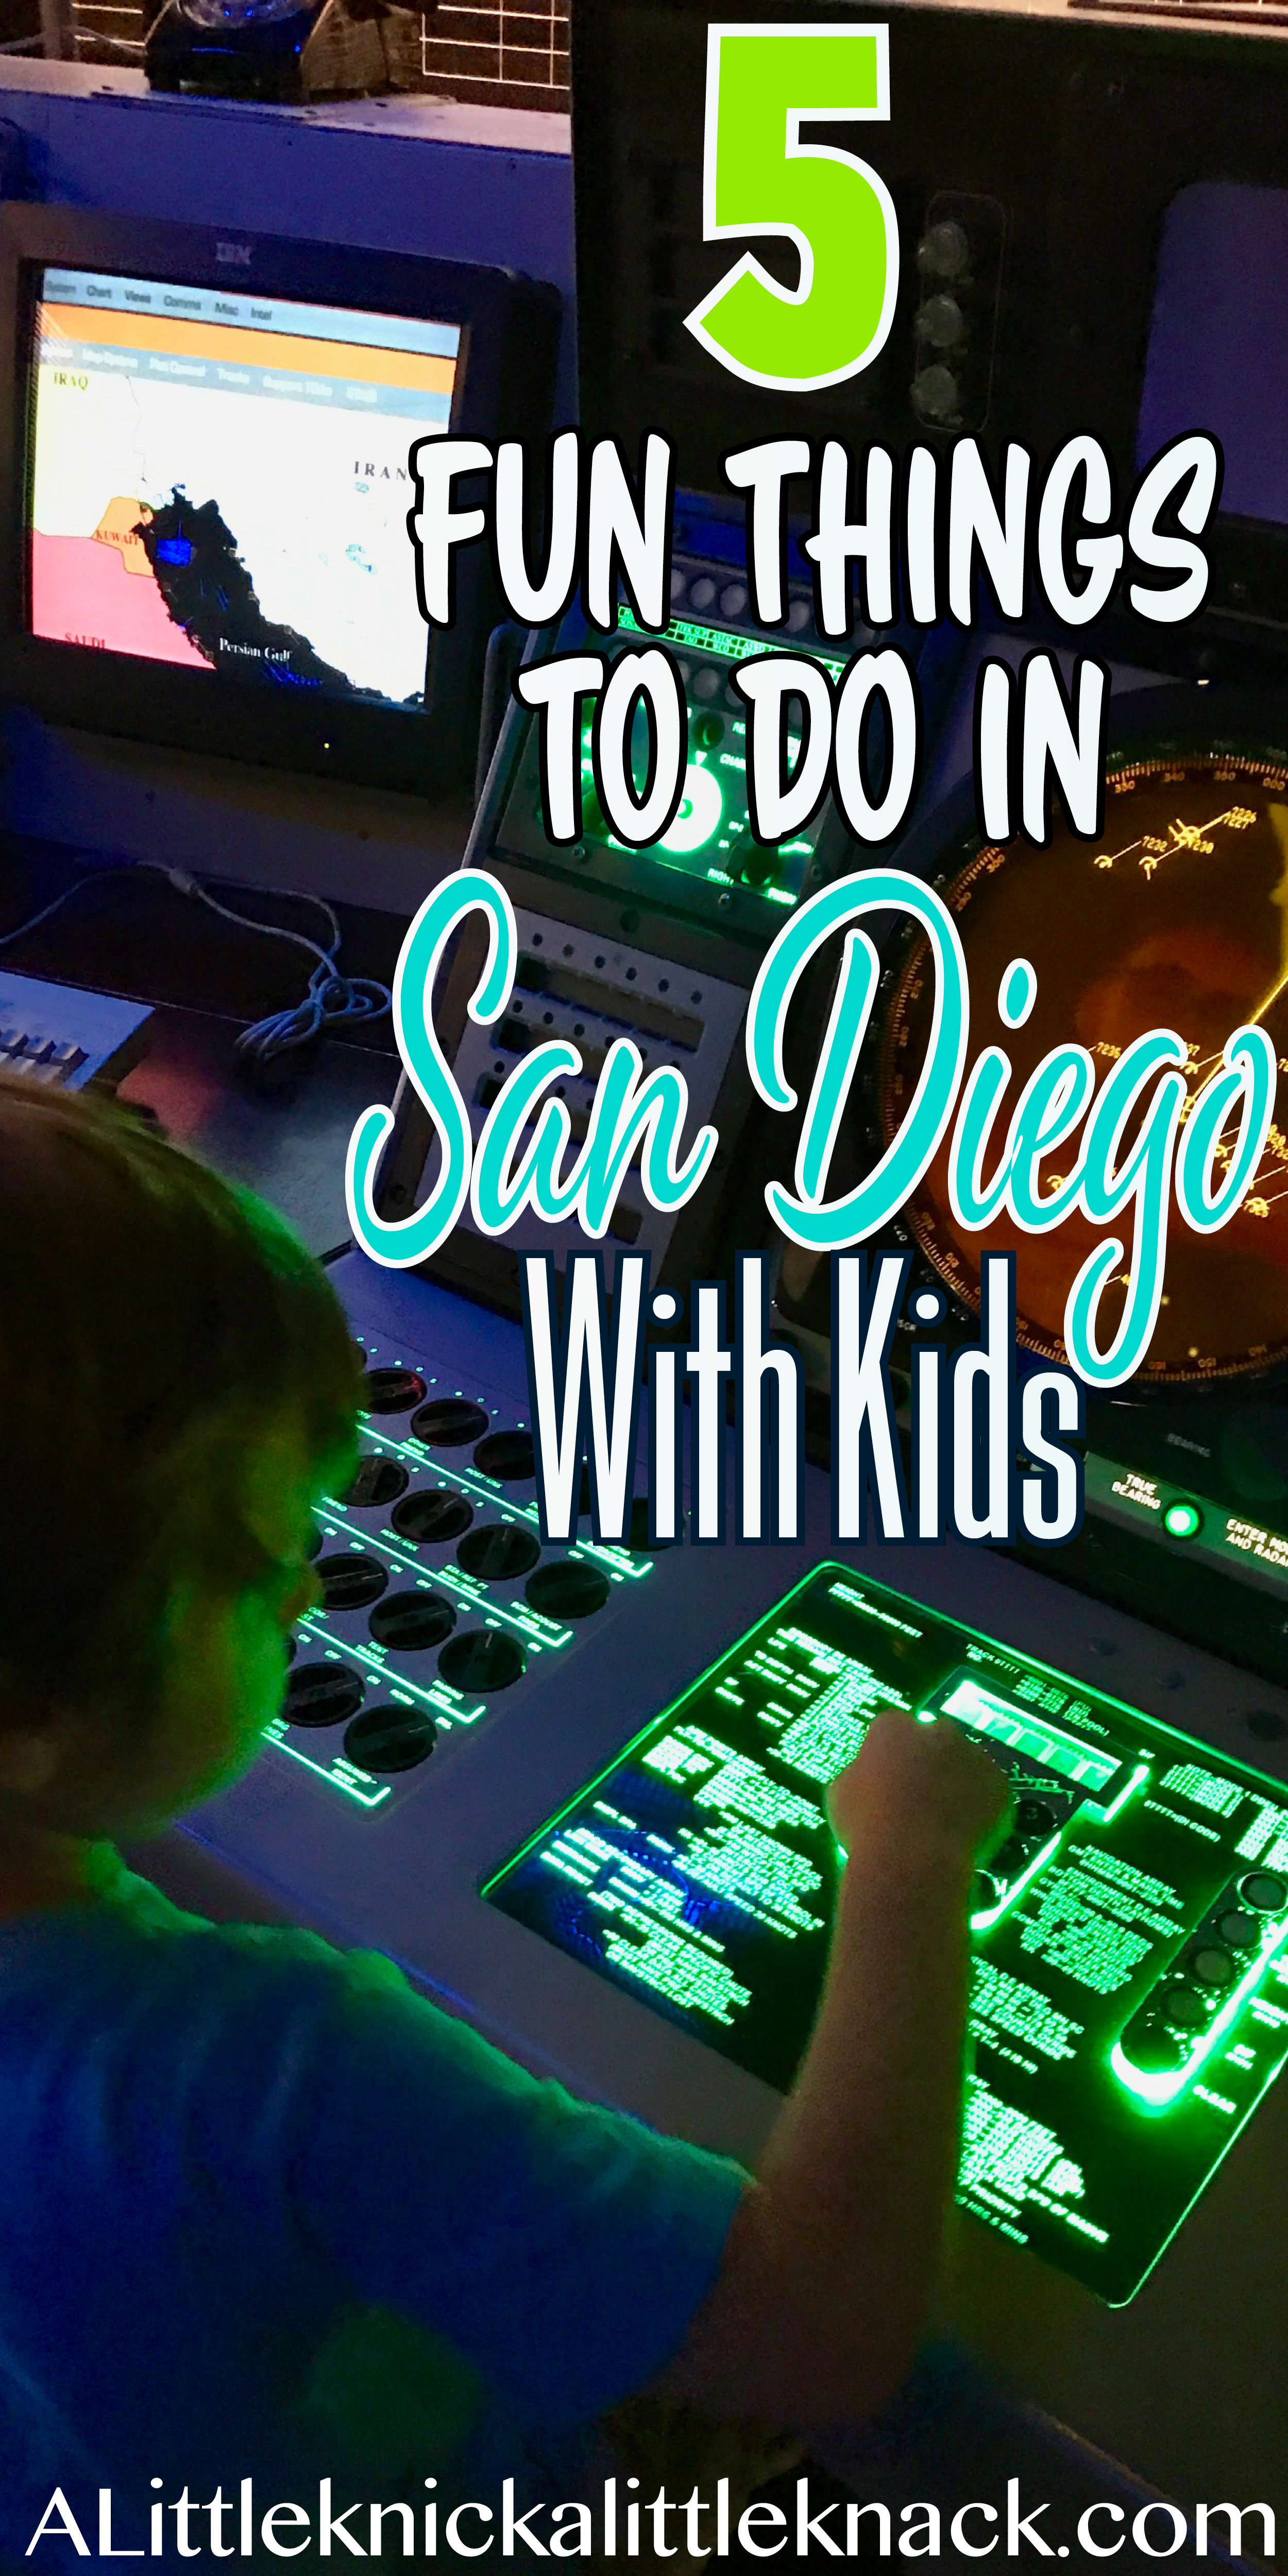 From naval ships to tide pools these are 5 best things to do in San Diego with kids.